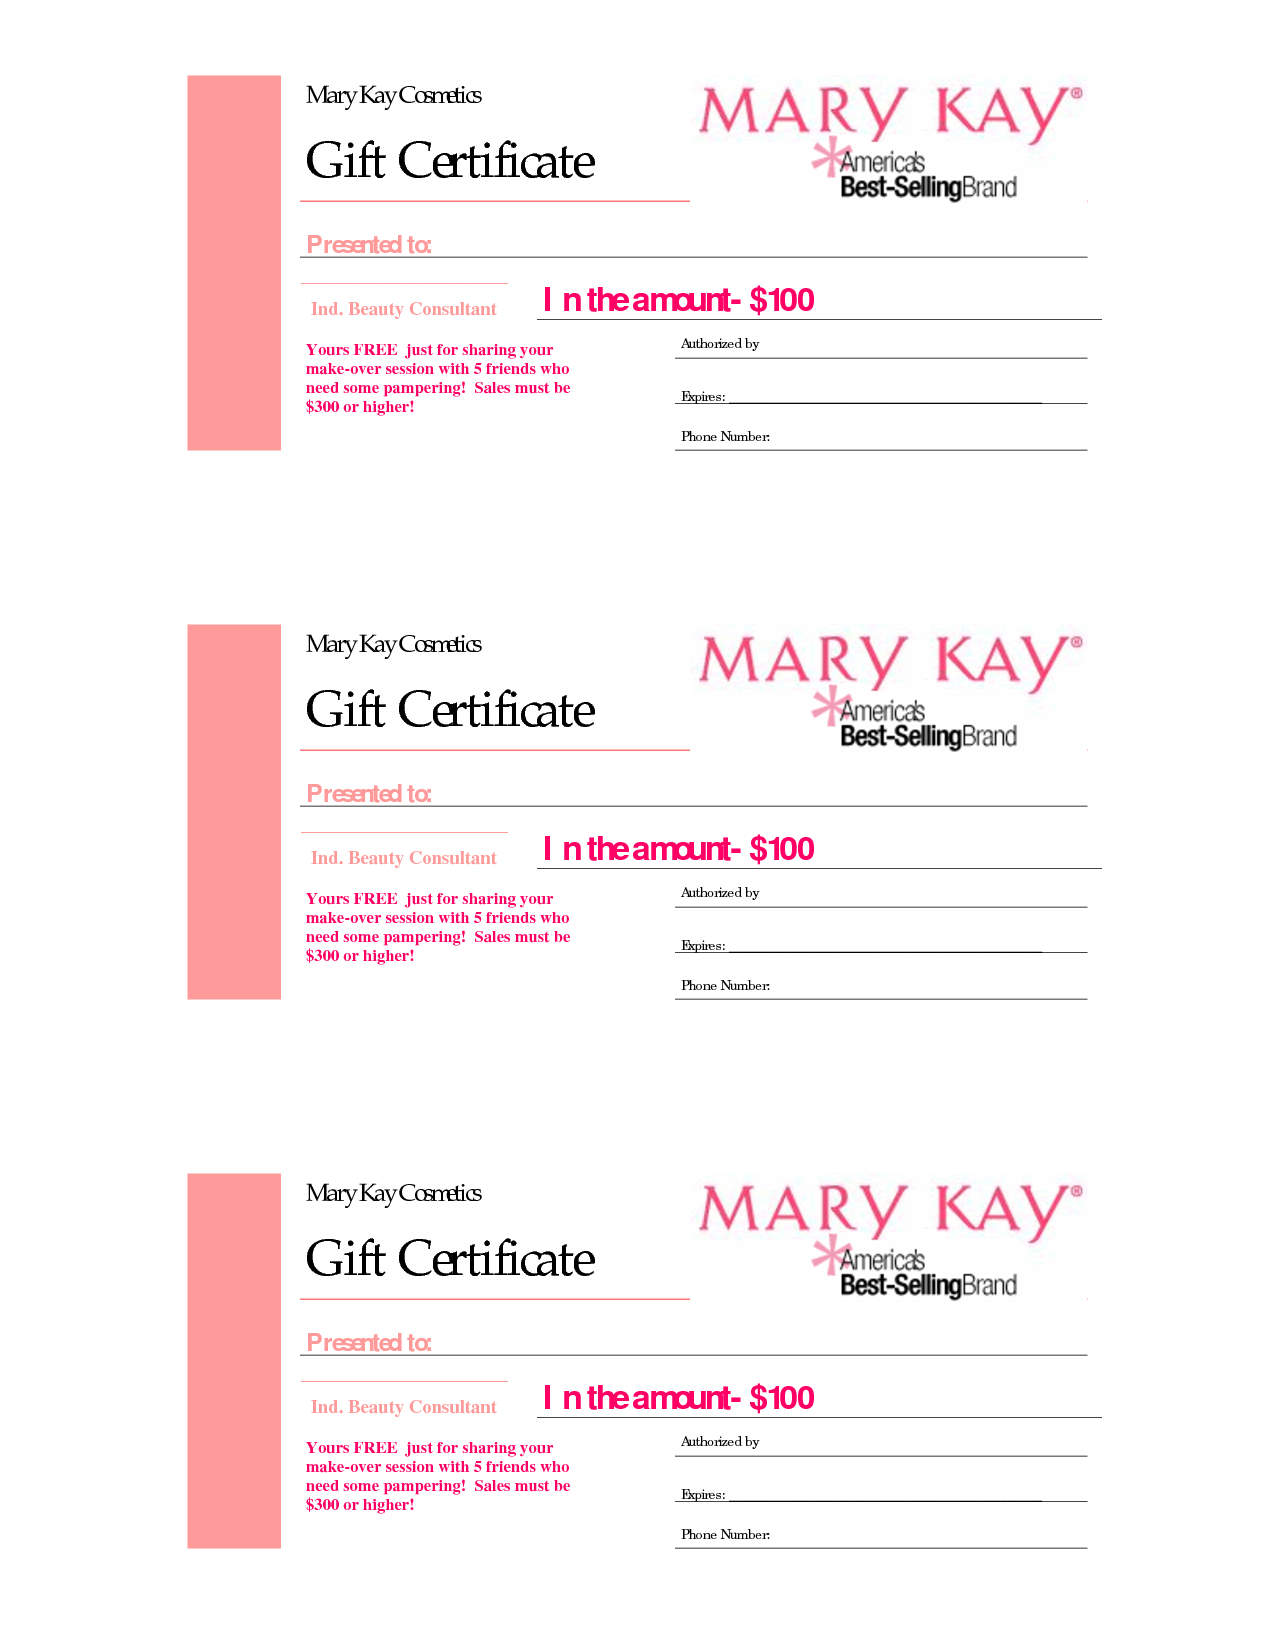 Gift Certificates | Mary Kay Gift Certificate! Checo That With Referral Certificate Template